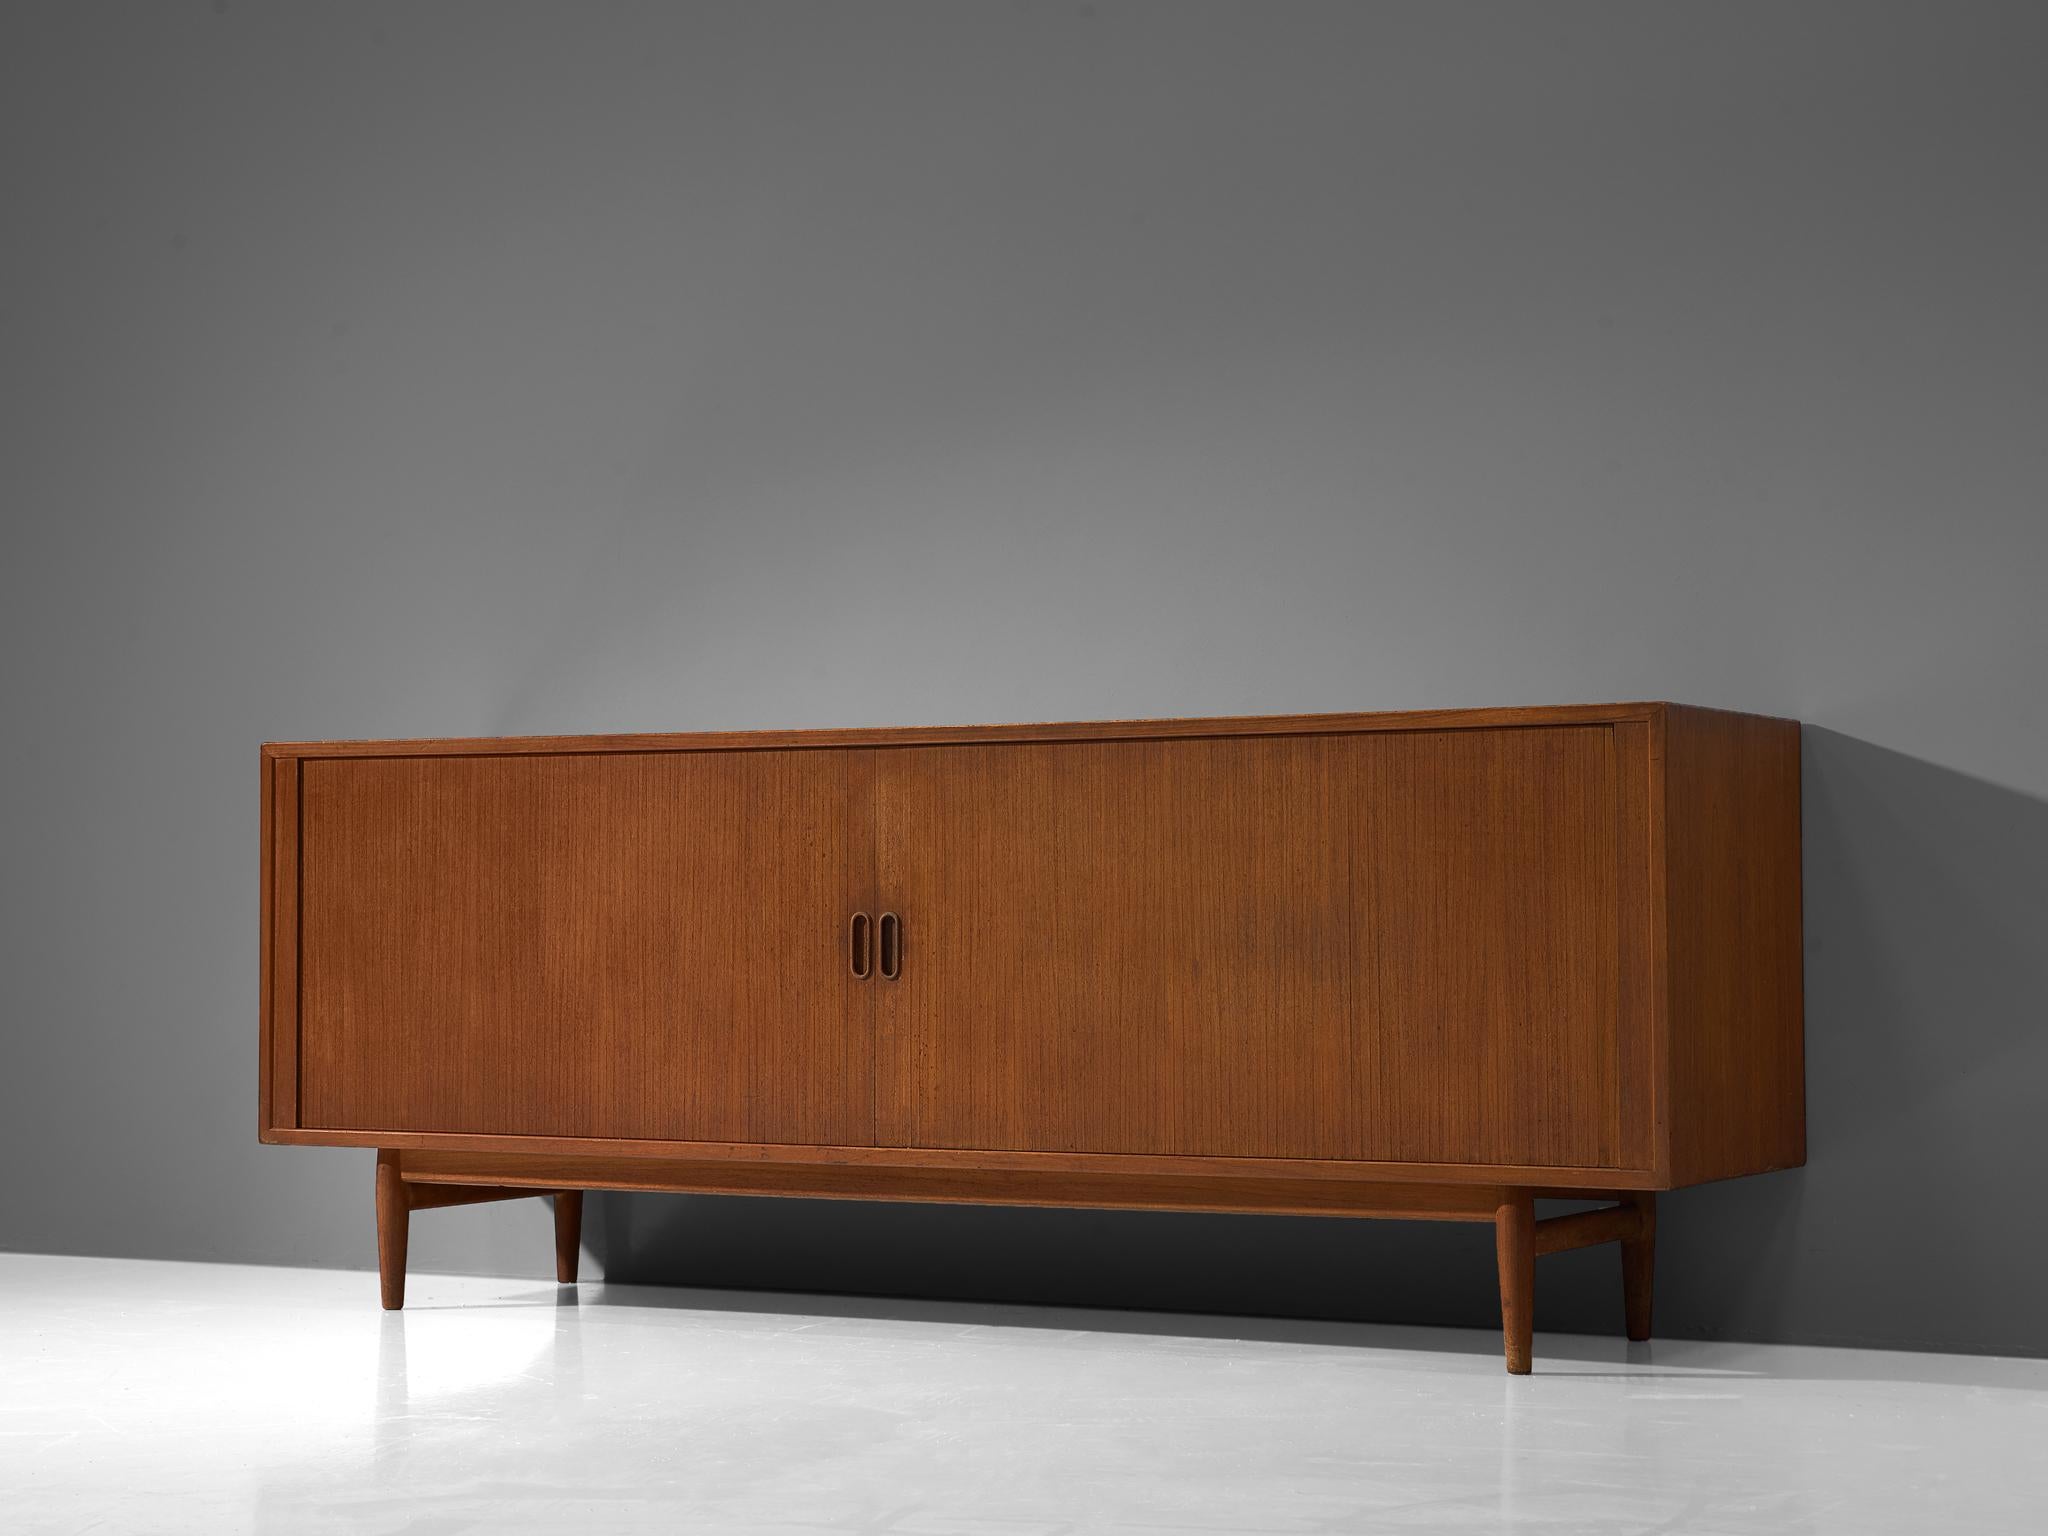 Sideboard, teak, Denmark, 1960s.

This Scandinavian Modern credenza is modest in its appearance yet highly well crafted. Sturdy and elegant with a rich teak finish and tapered legs. This beautiful piece is equipped with oval shaped handles and